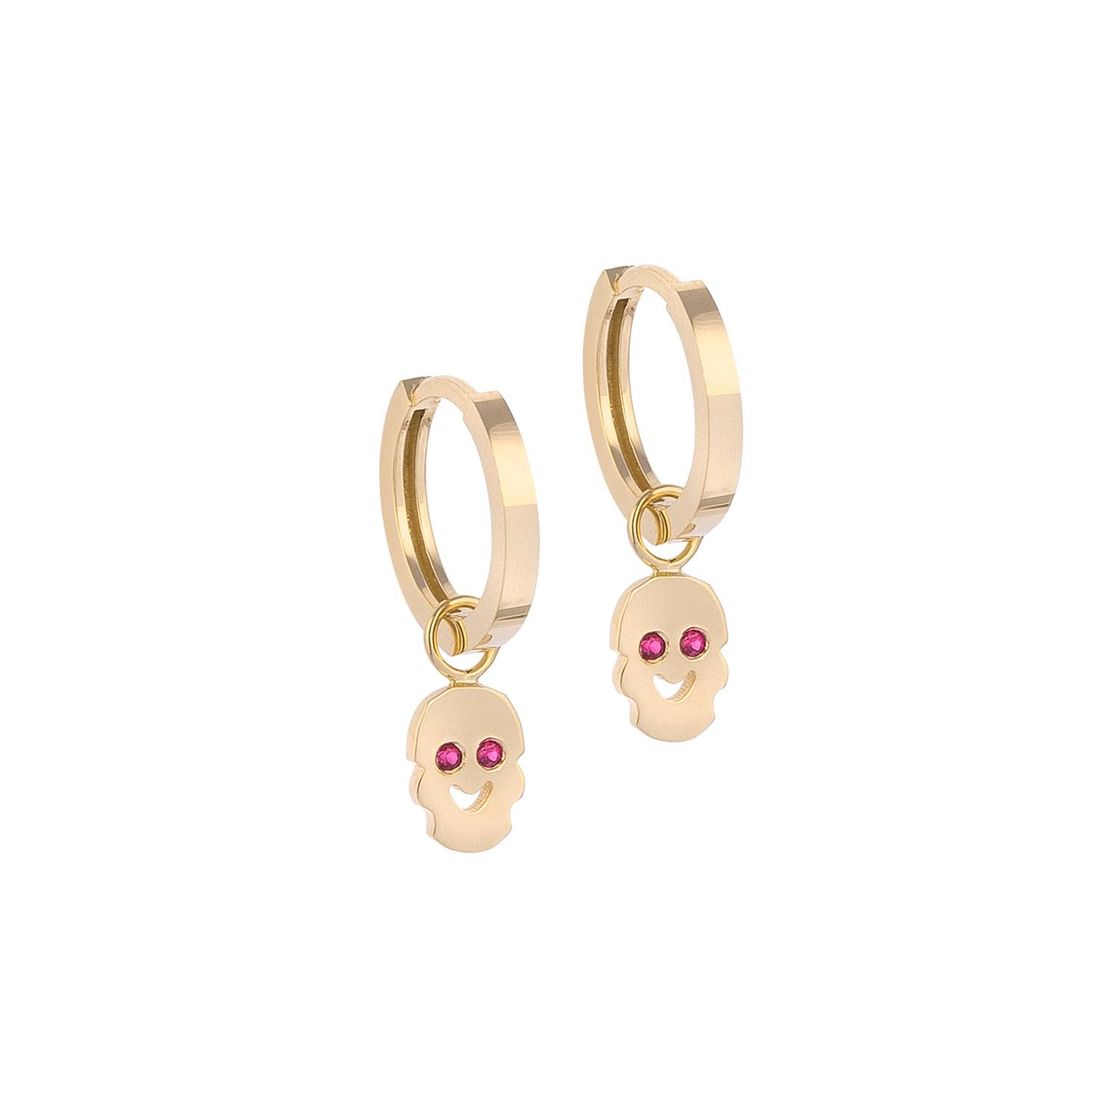 Smiling Face-shaped Gold Earring Charm with Ruby Stones